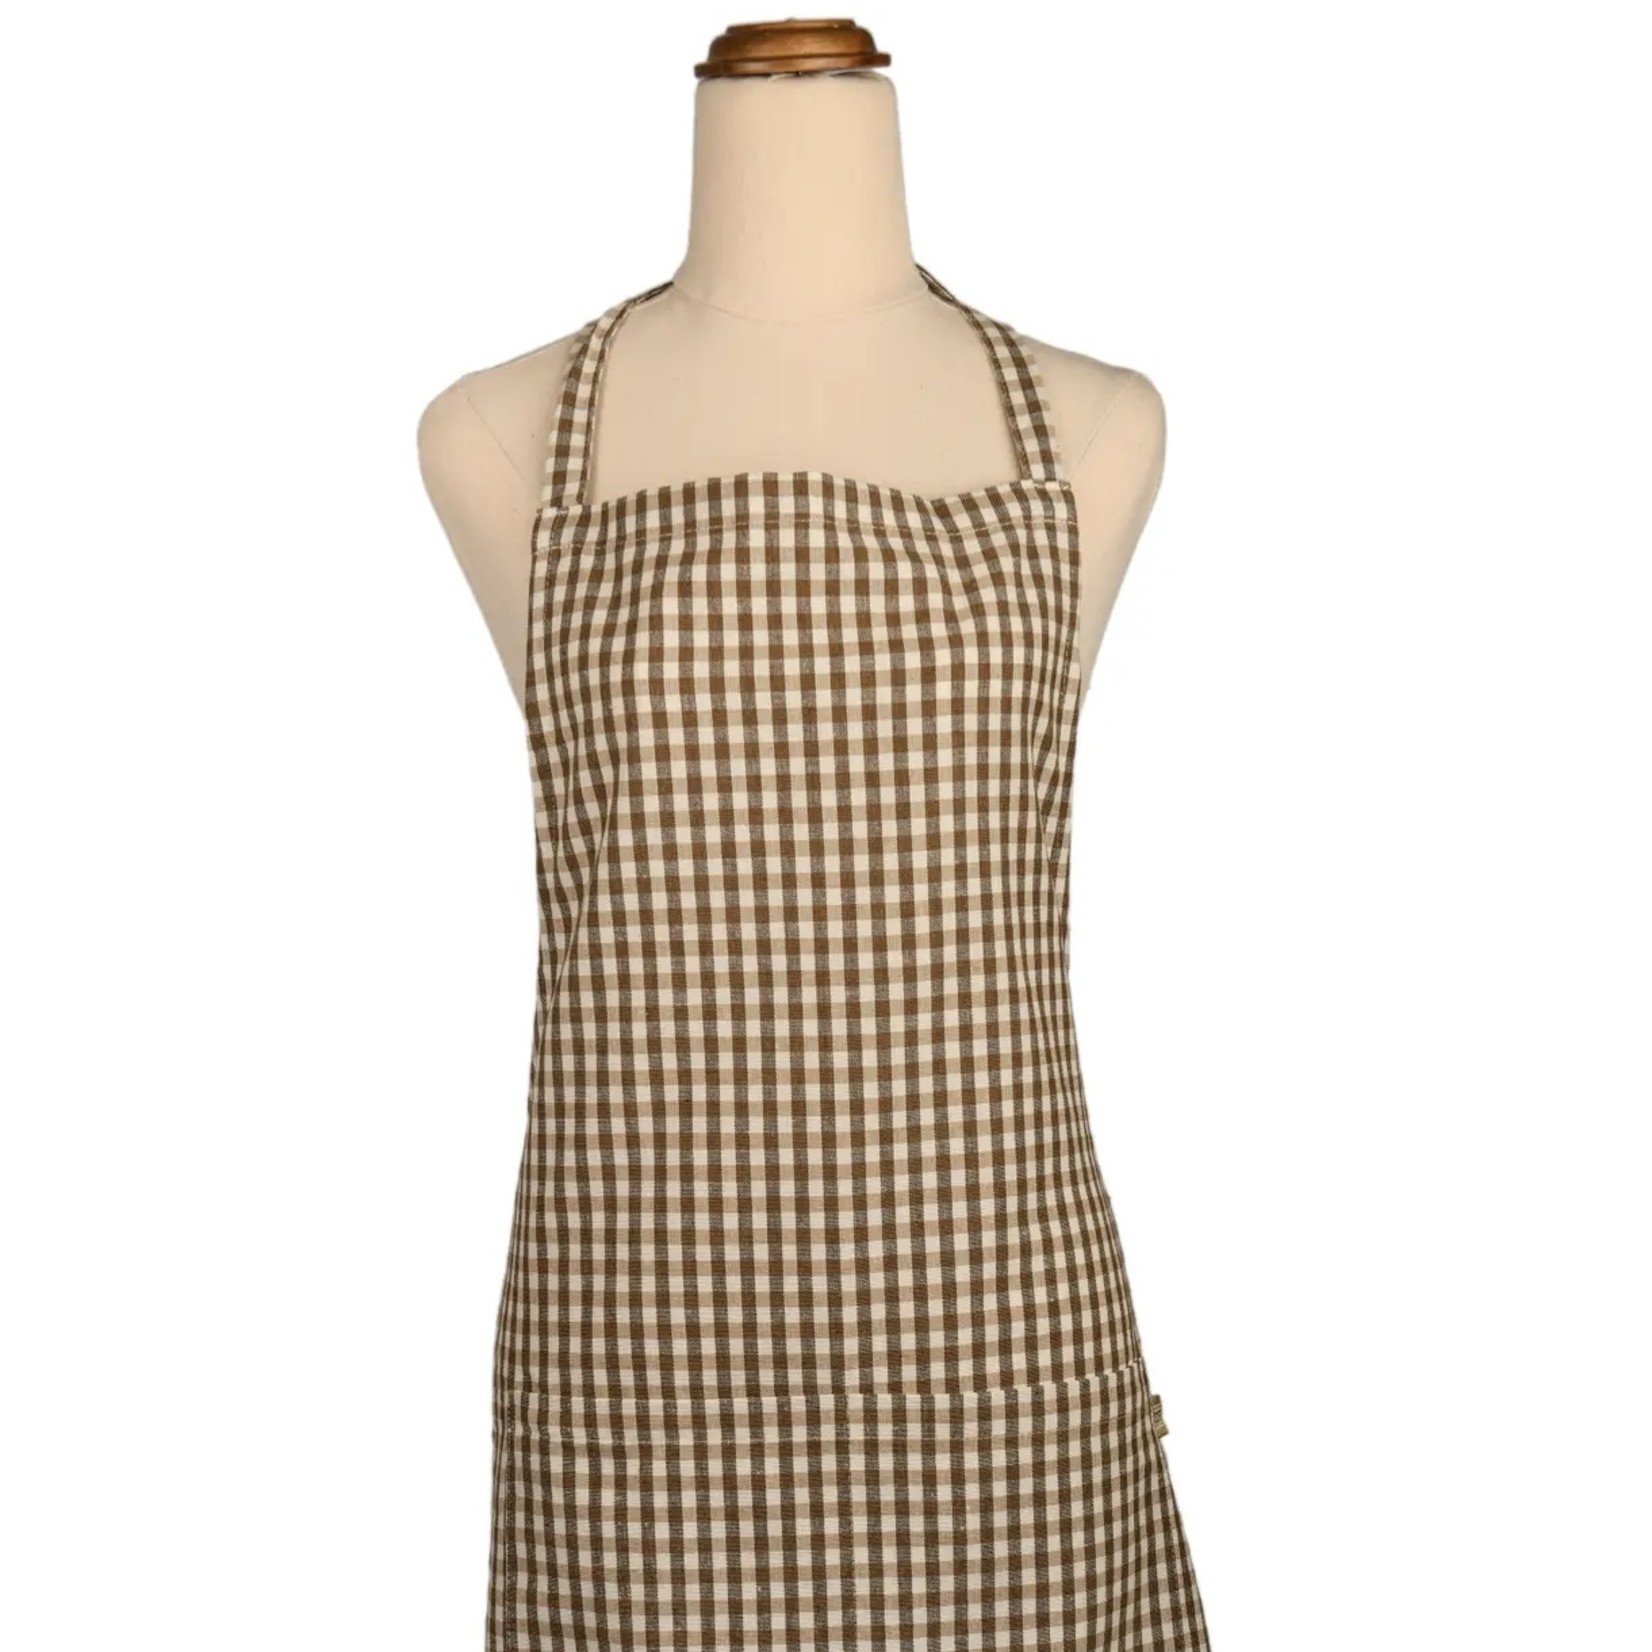 Gingham Apron - Earth Brown